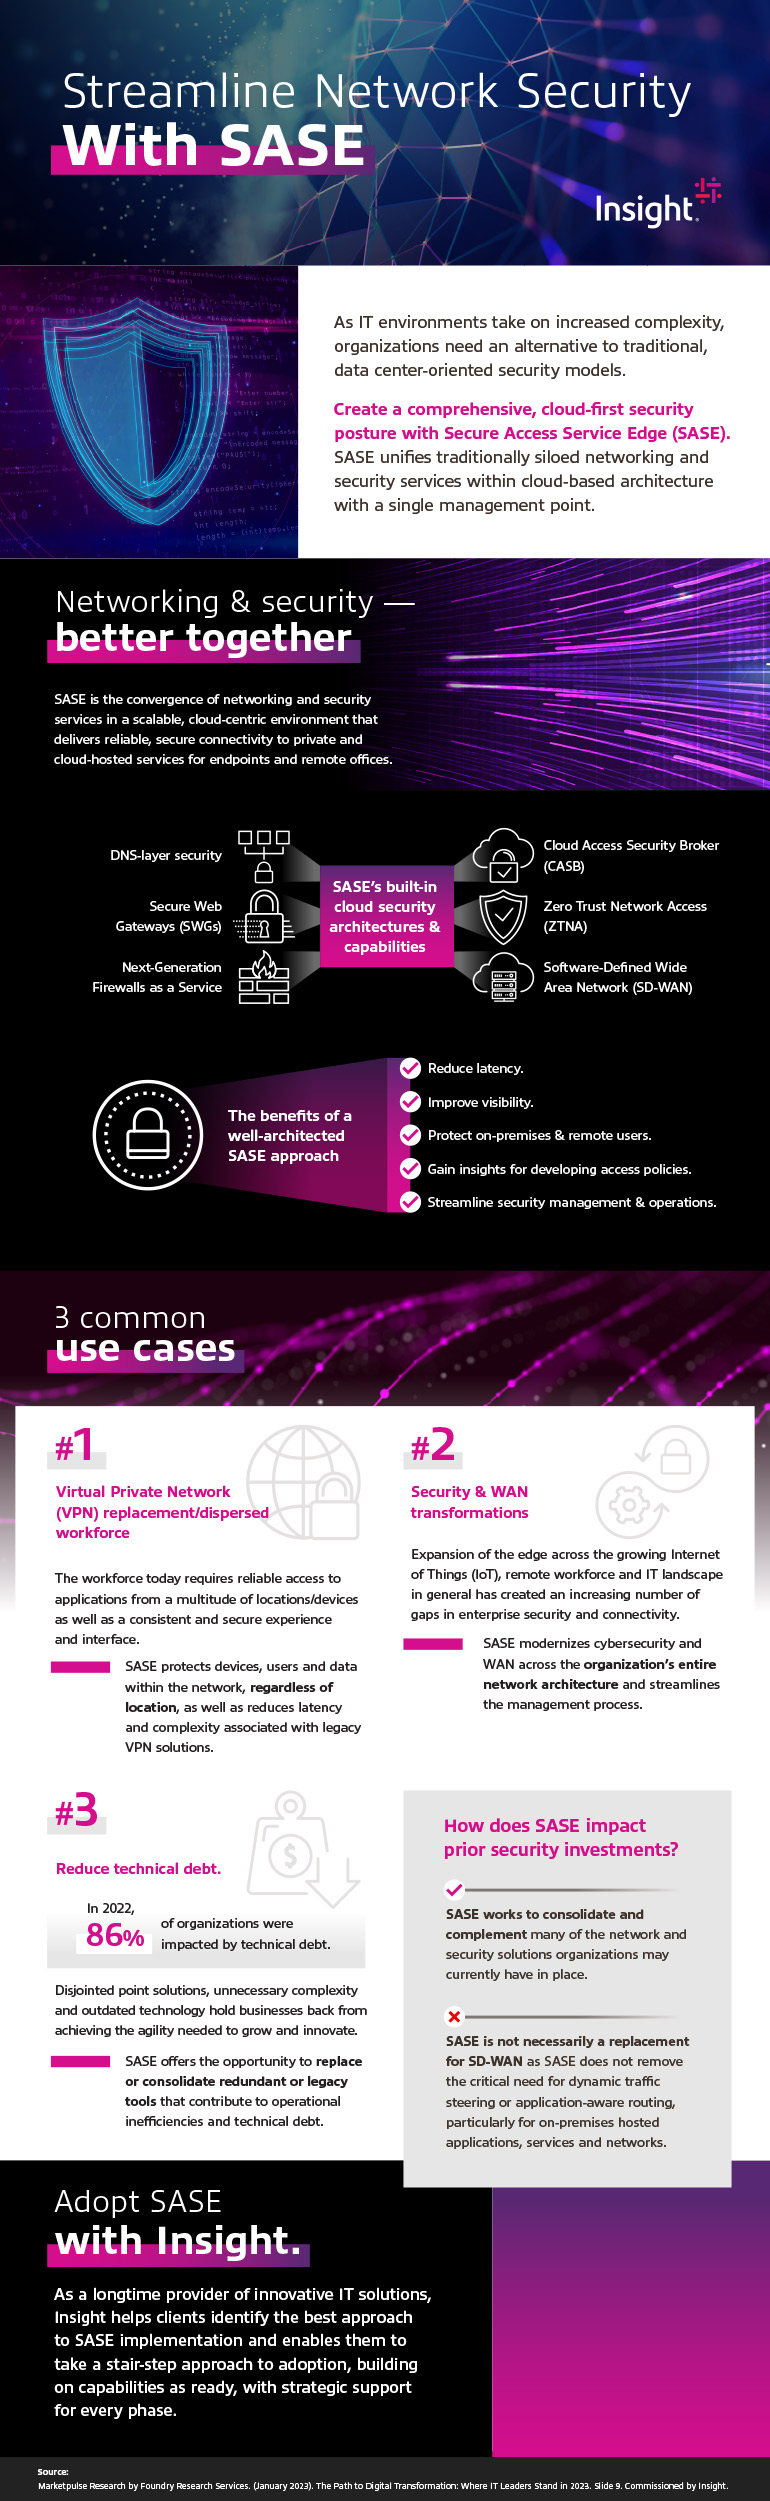 Infographic of Streamline Network Security With SASE